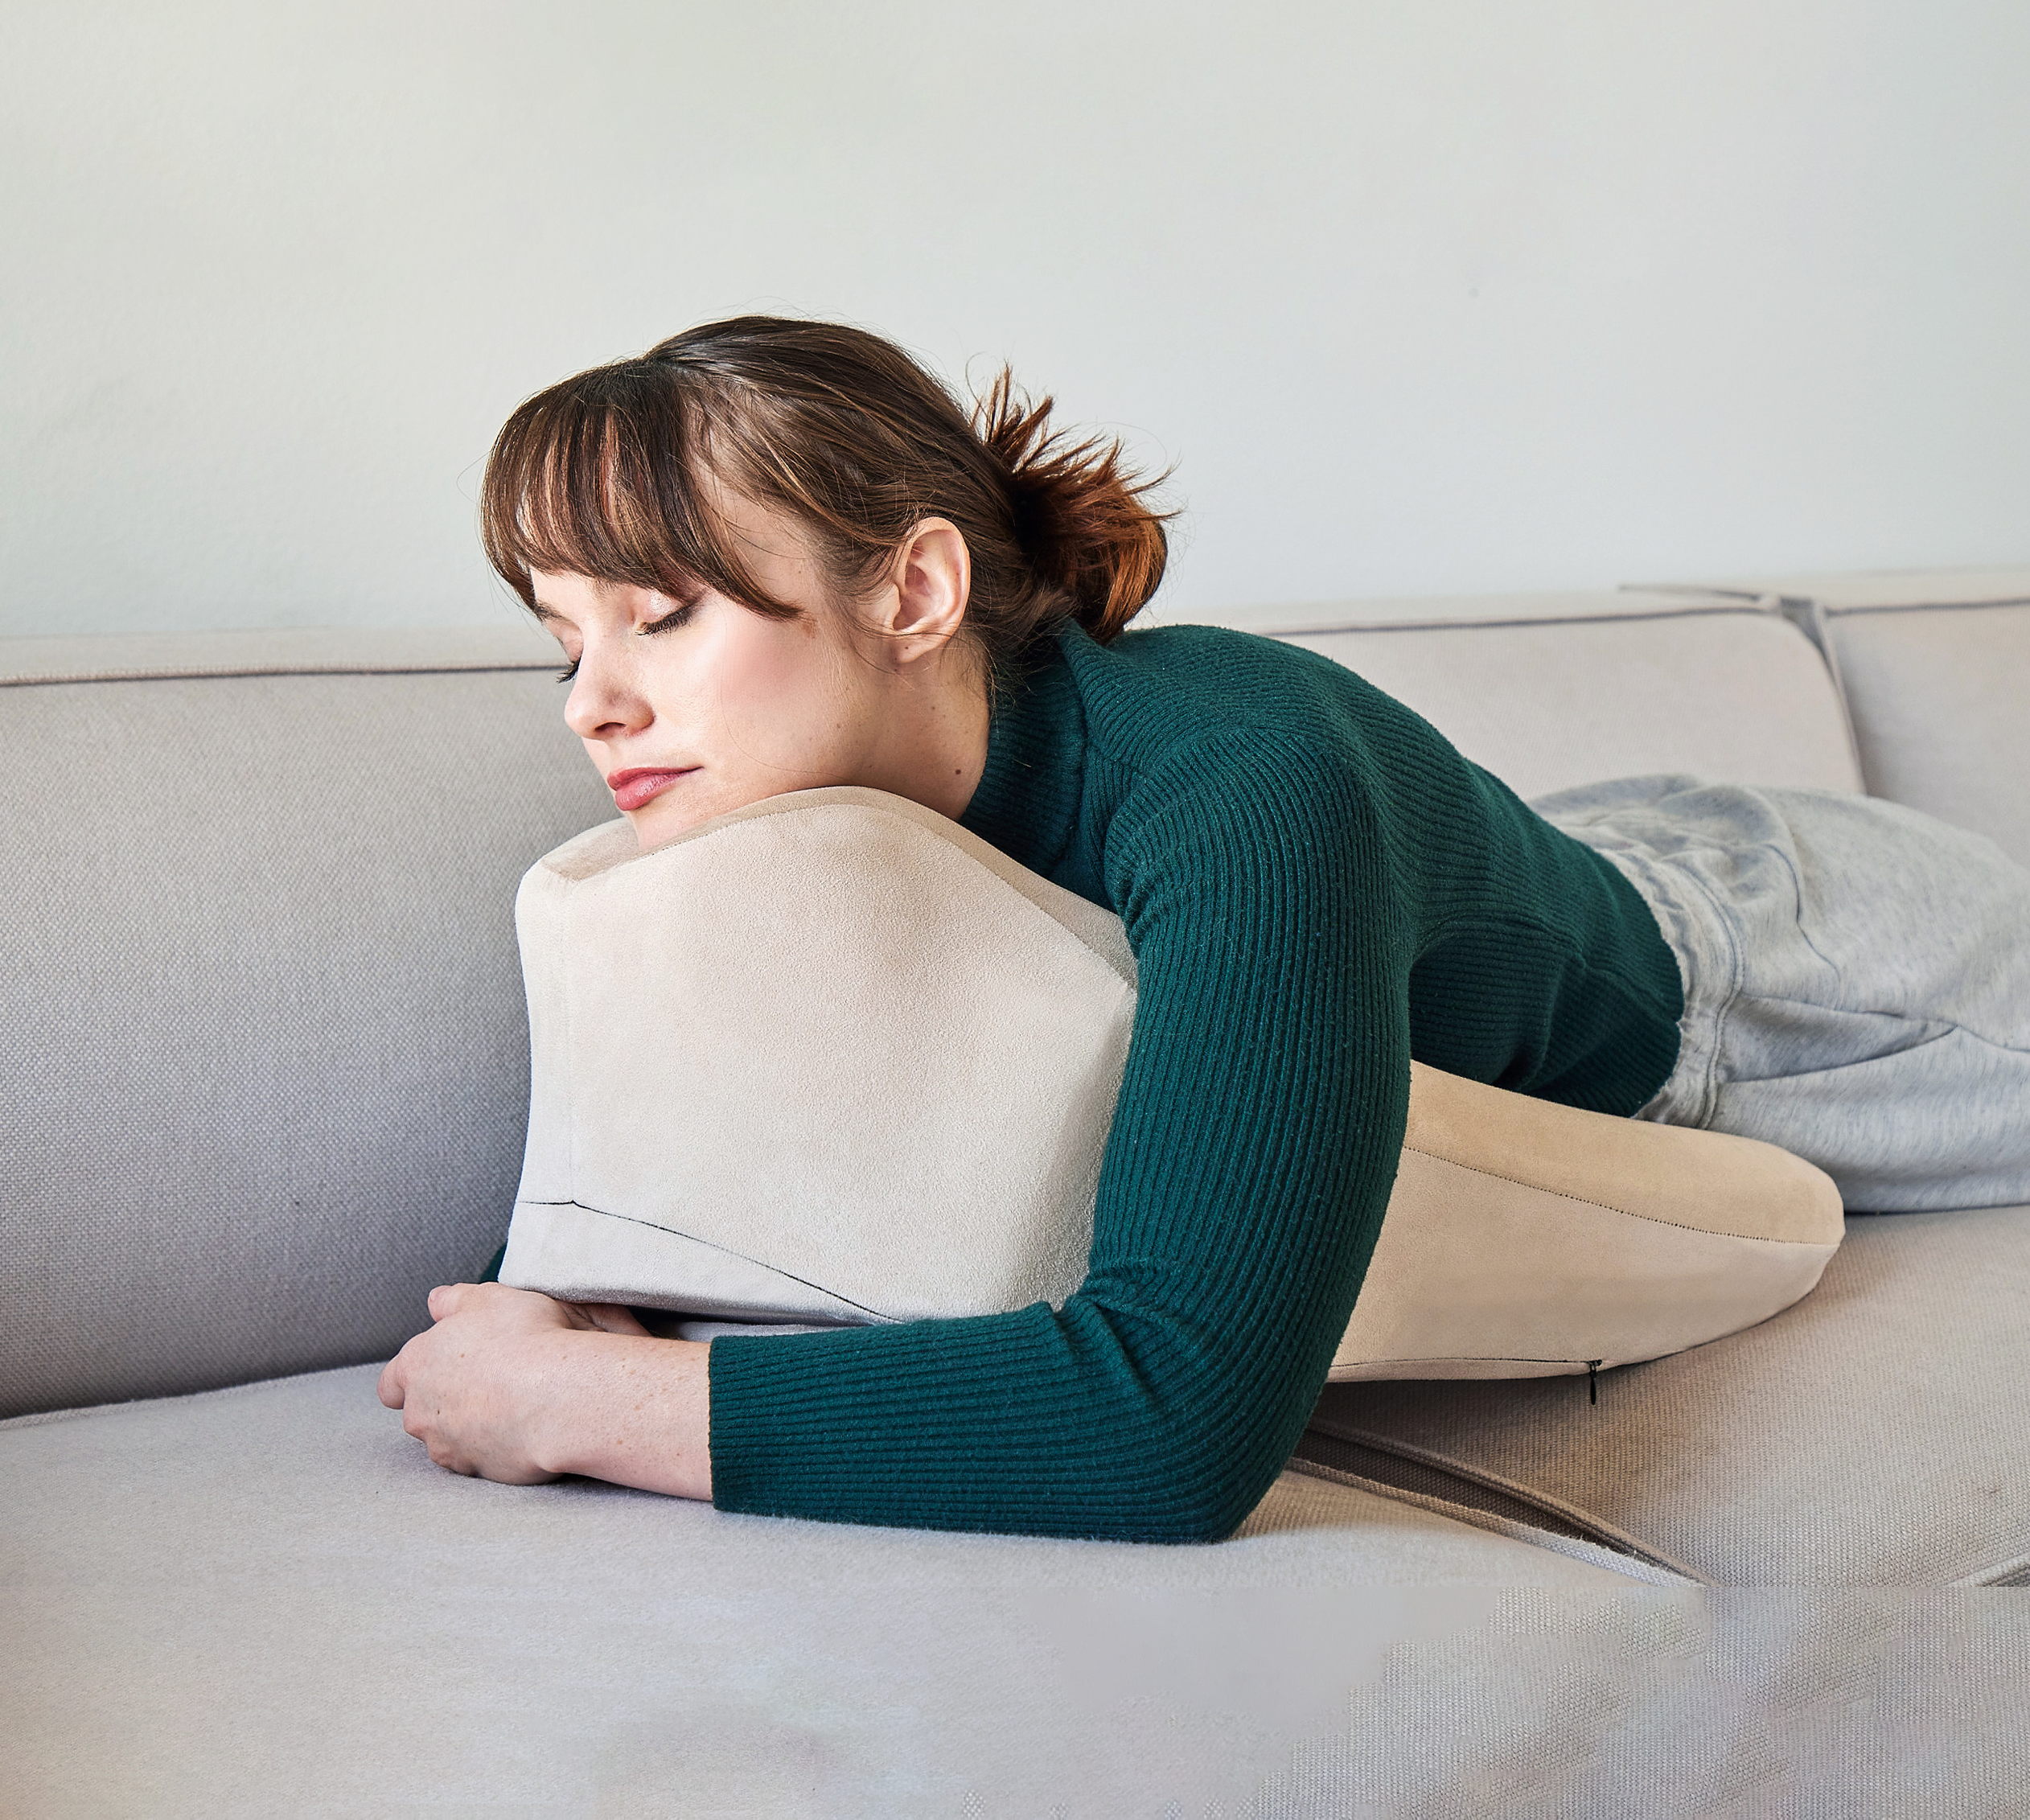 GentleTouch Prone Positioning Pillows